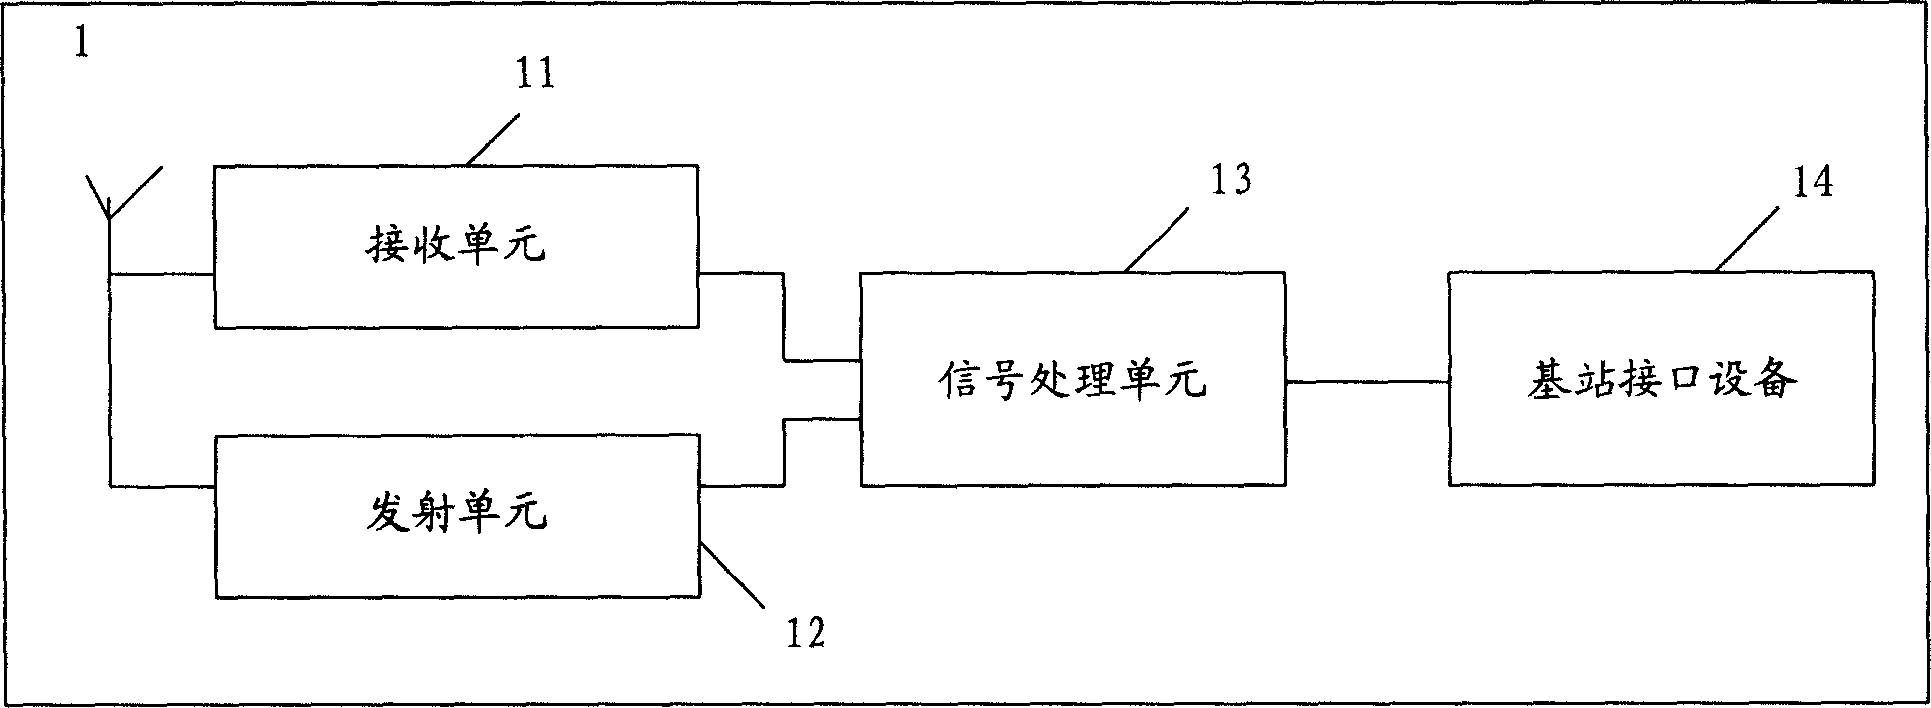 Method and apparatus for controlling emitting time slot of base station in radio communication system